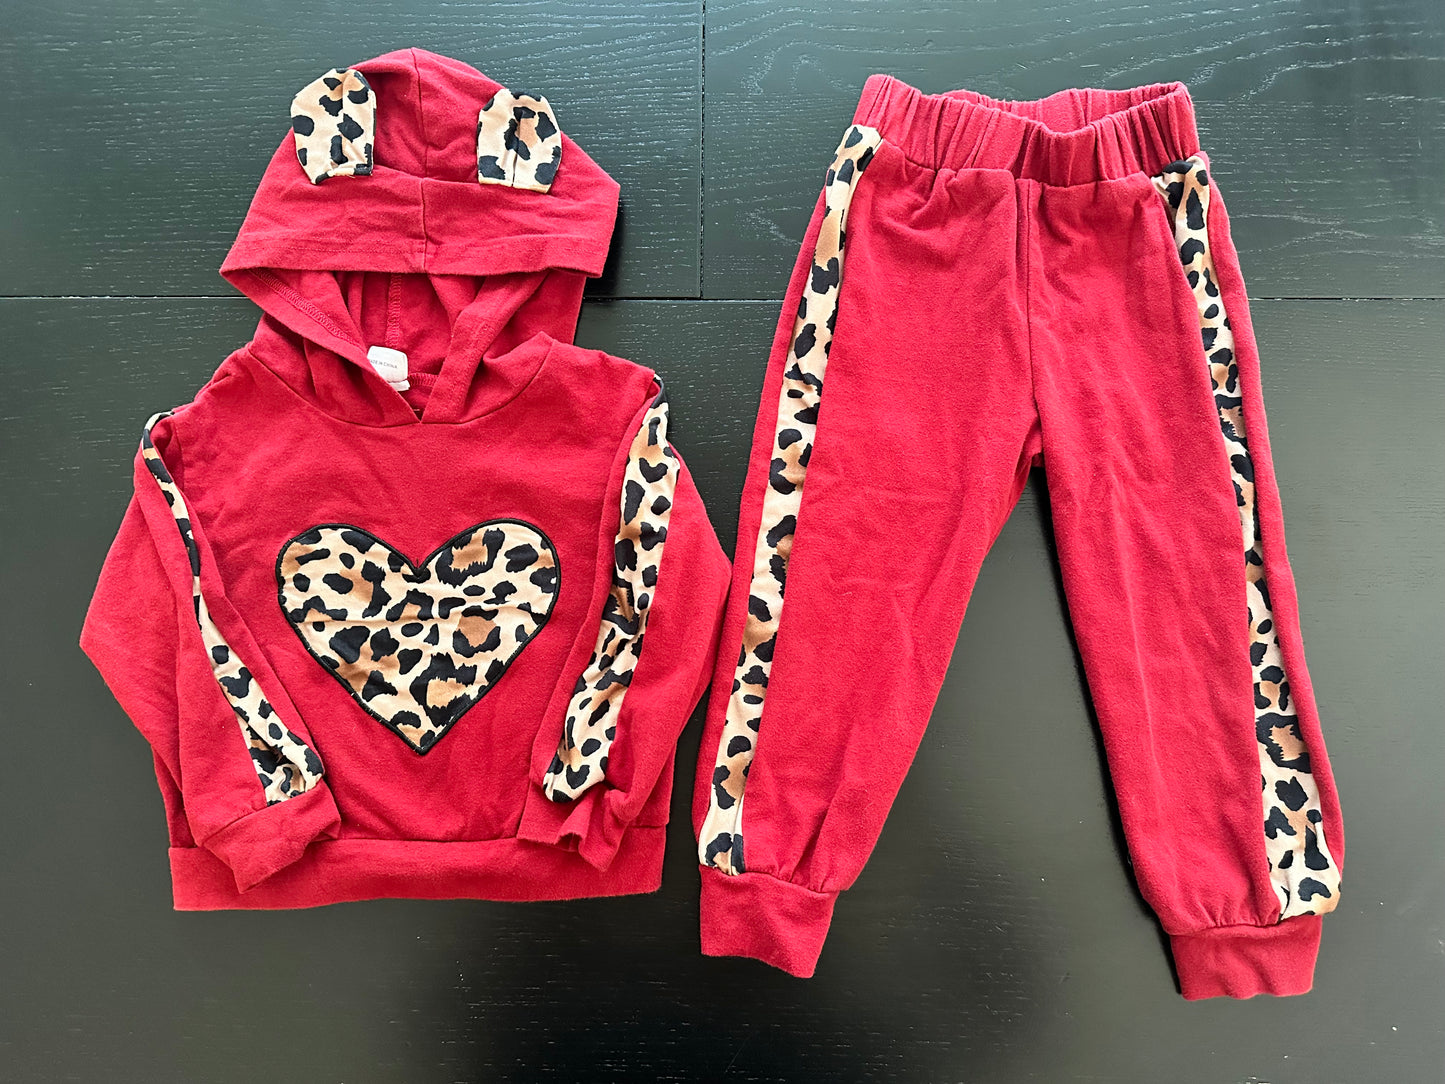 18-24 Month Girl’s Cheetah Outfit